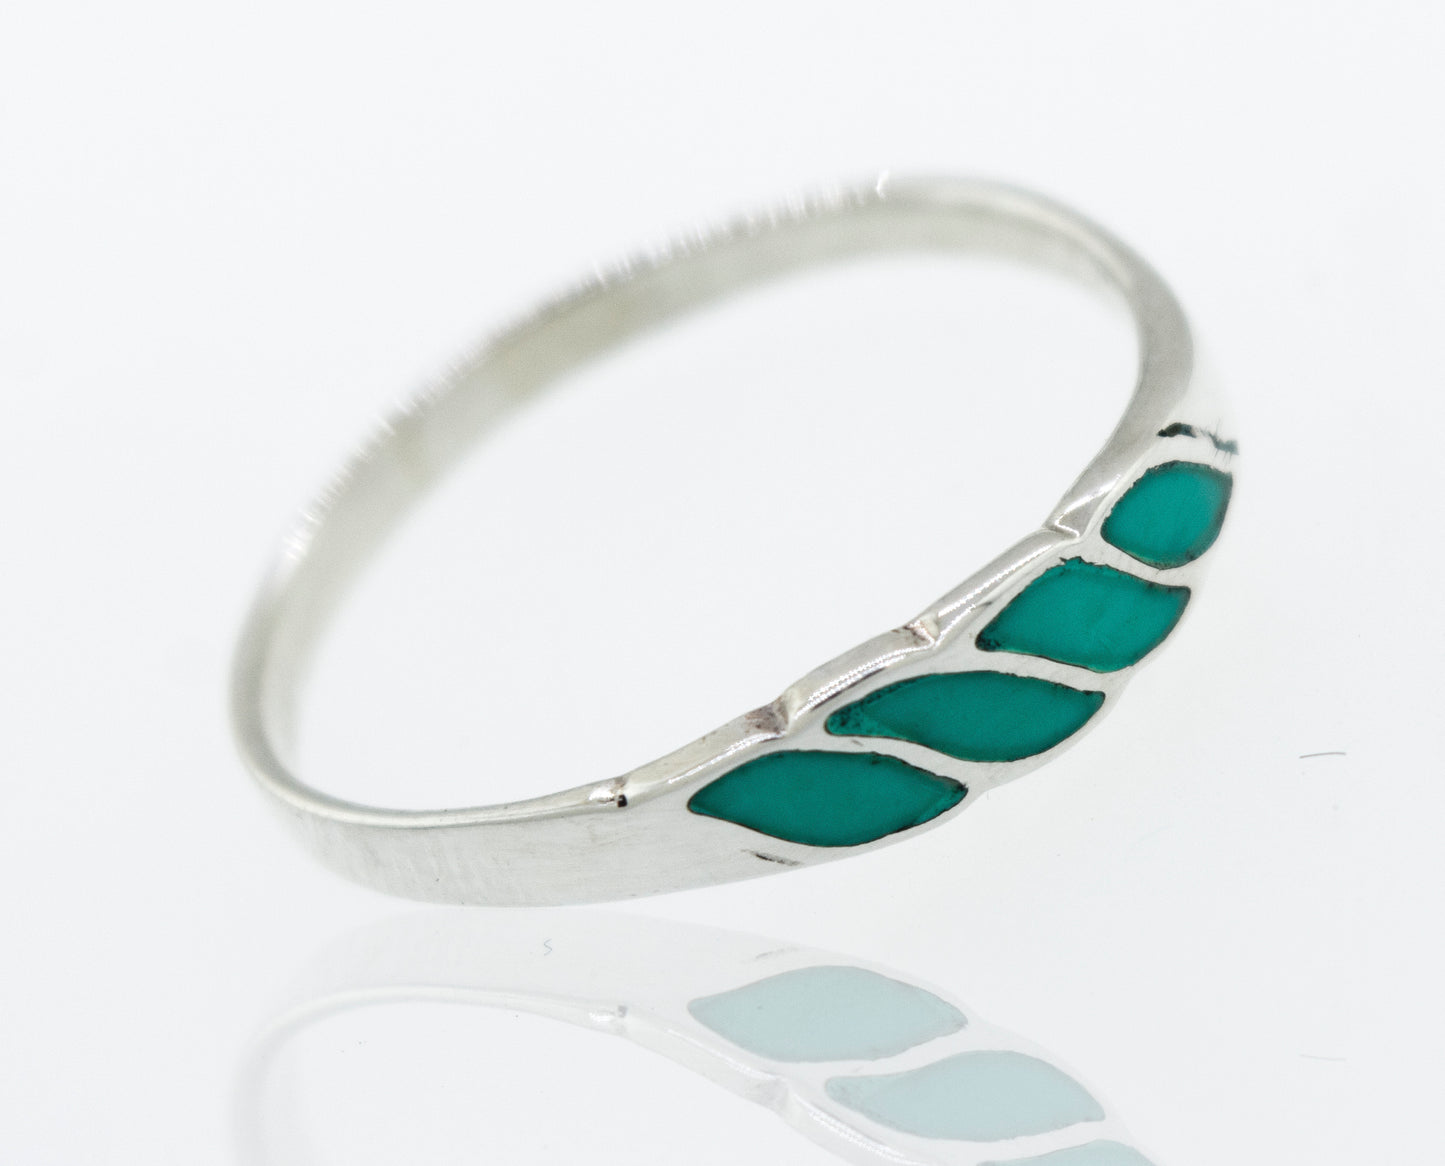 A Super Silver Turquoise Striped Ring With Four stripes with reconstituted turquoise stones.